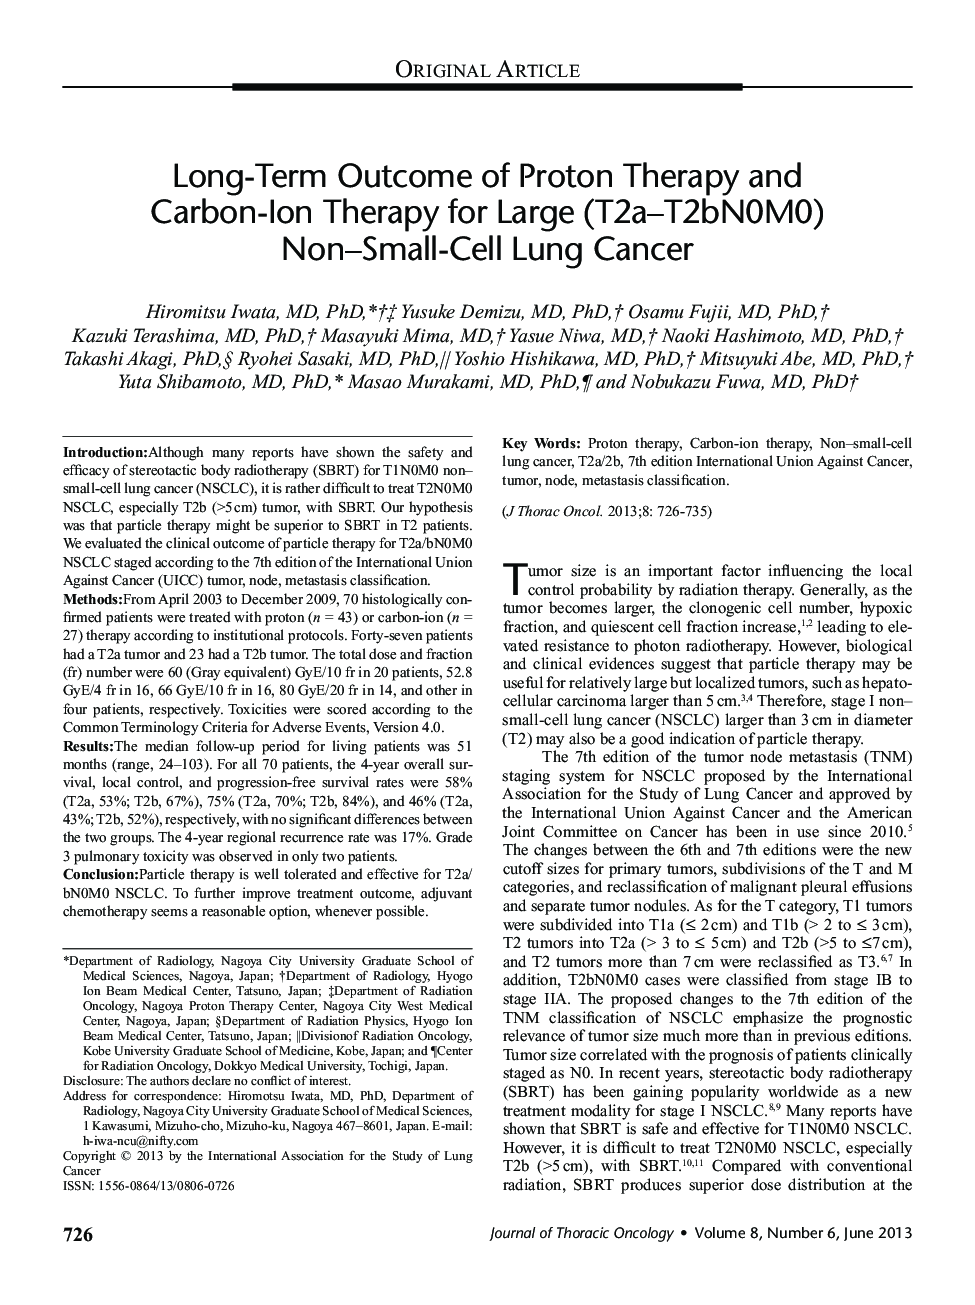 Long-Term Outcome of Proton Therapy and Carbon-Ion Therapy for Large (T2a–T2bN0M0) Non–Small-Cell Lung Cancer 